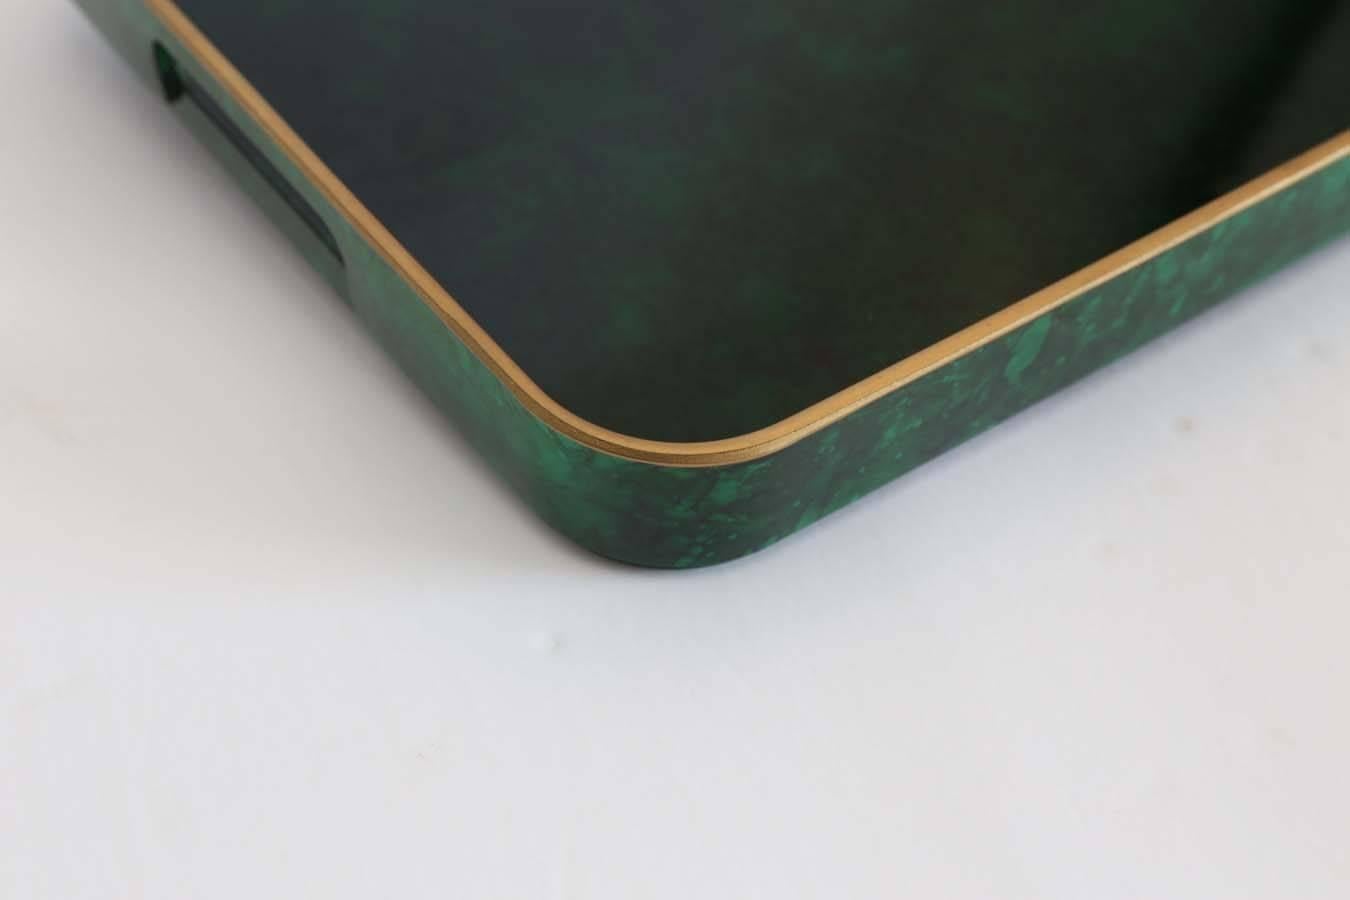 Offered is a gorgeous faux malachite with gold rim serving tray. Perfect for cocktails on a bar or decorative items in a powder bath.